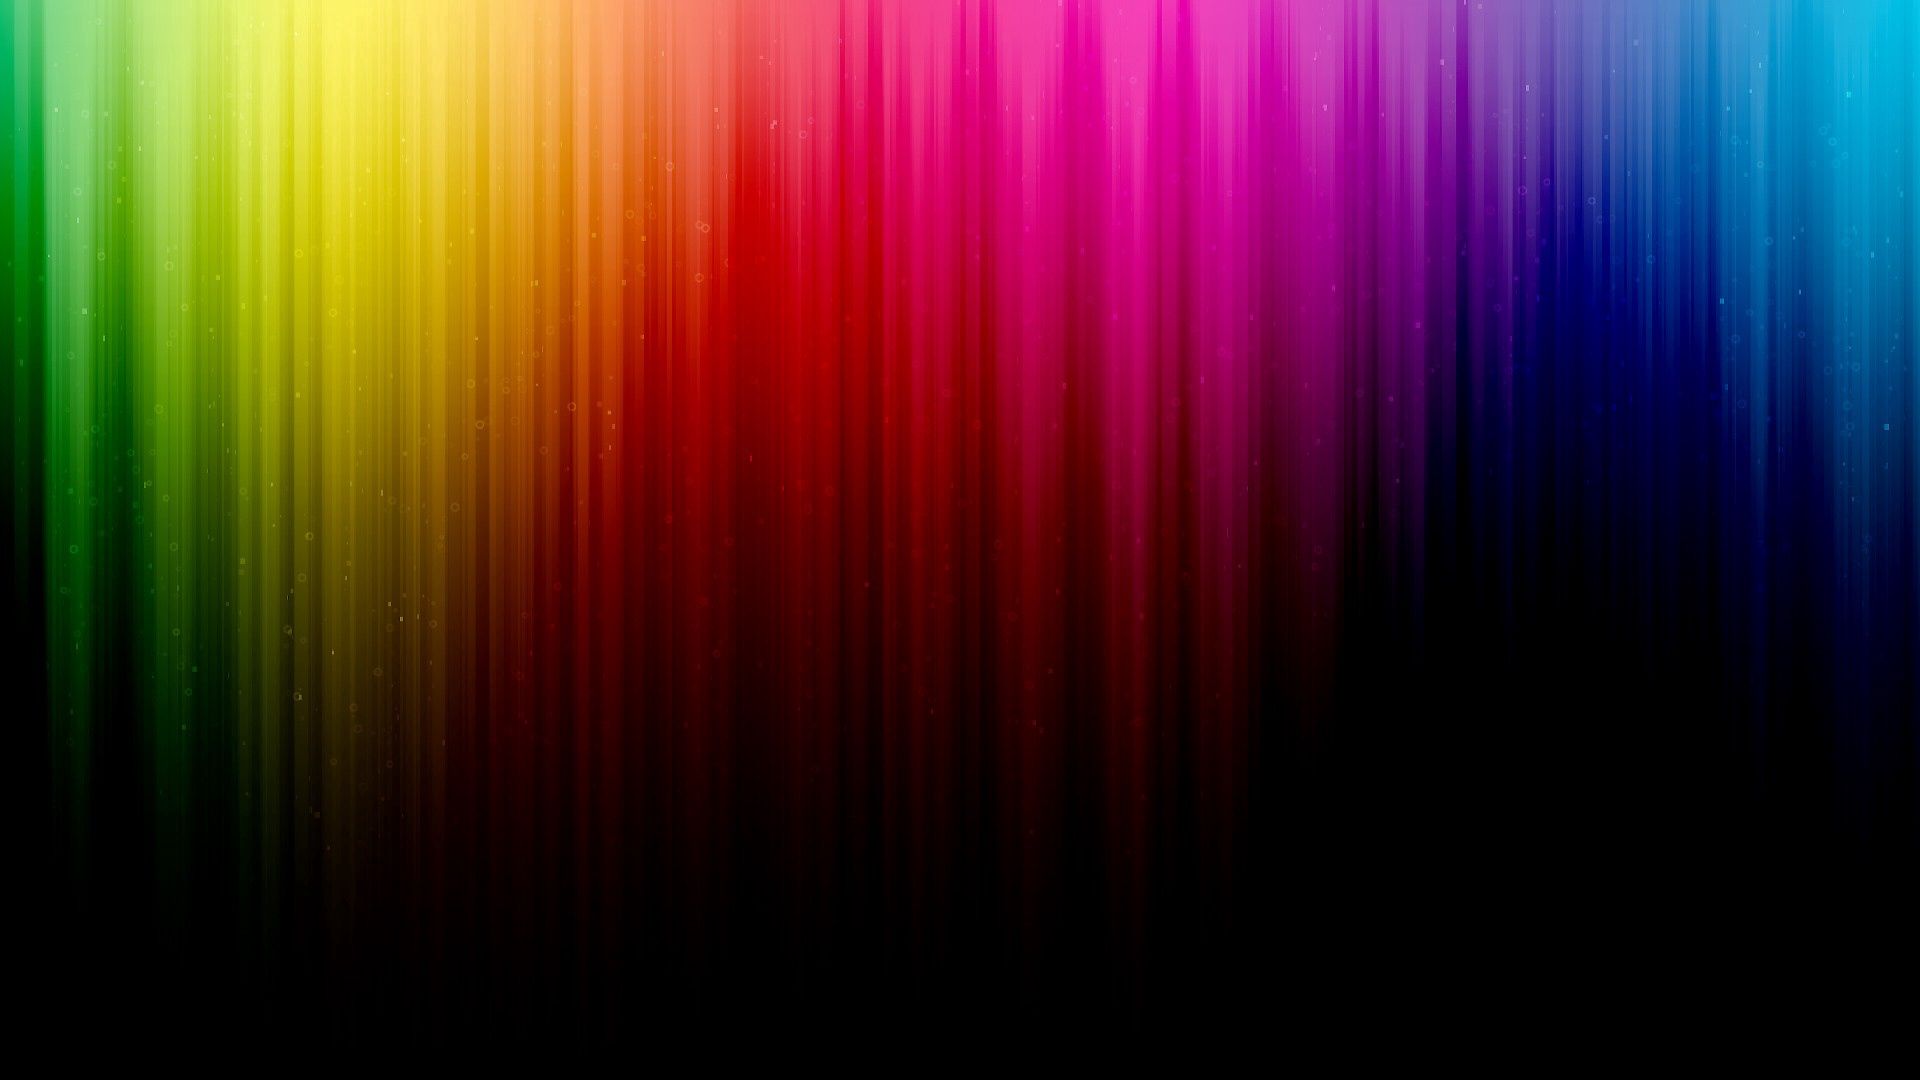 streaks, abstract, background, rainbow, lines, shadow, stripes, iridescent, vertical High Definition image